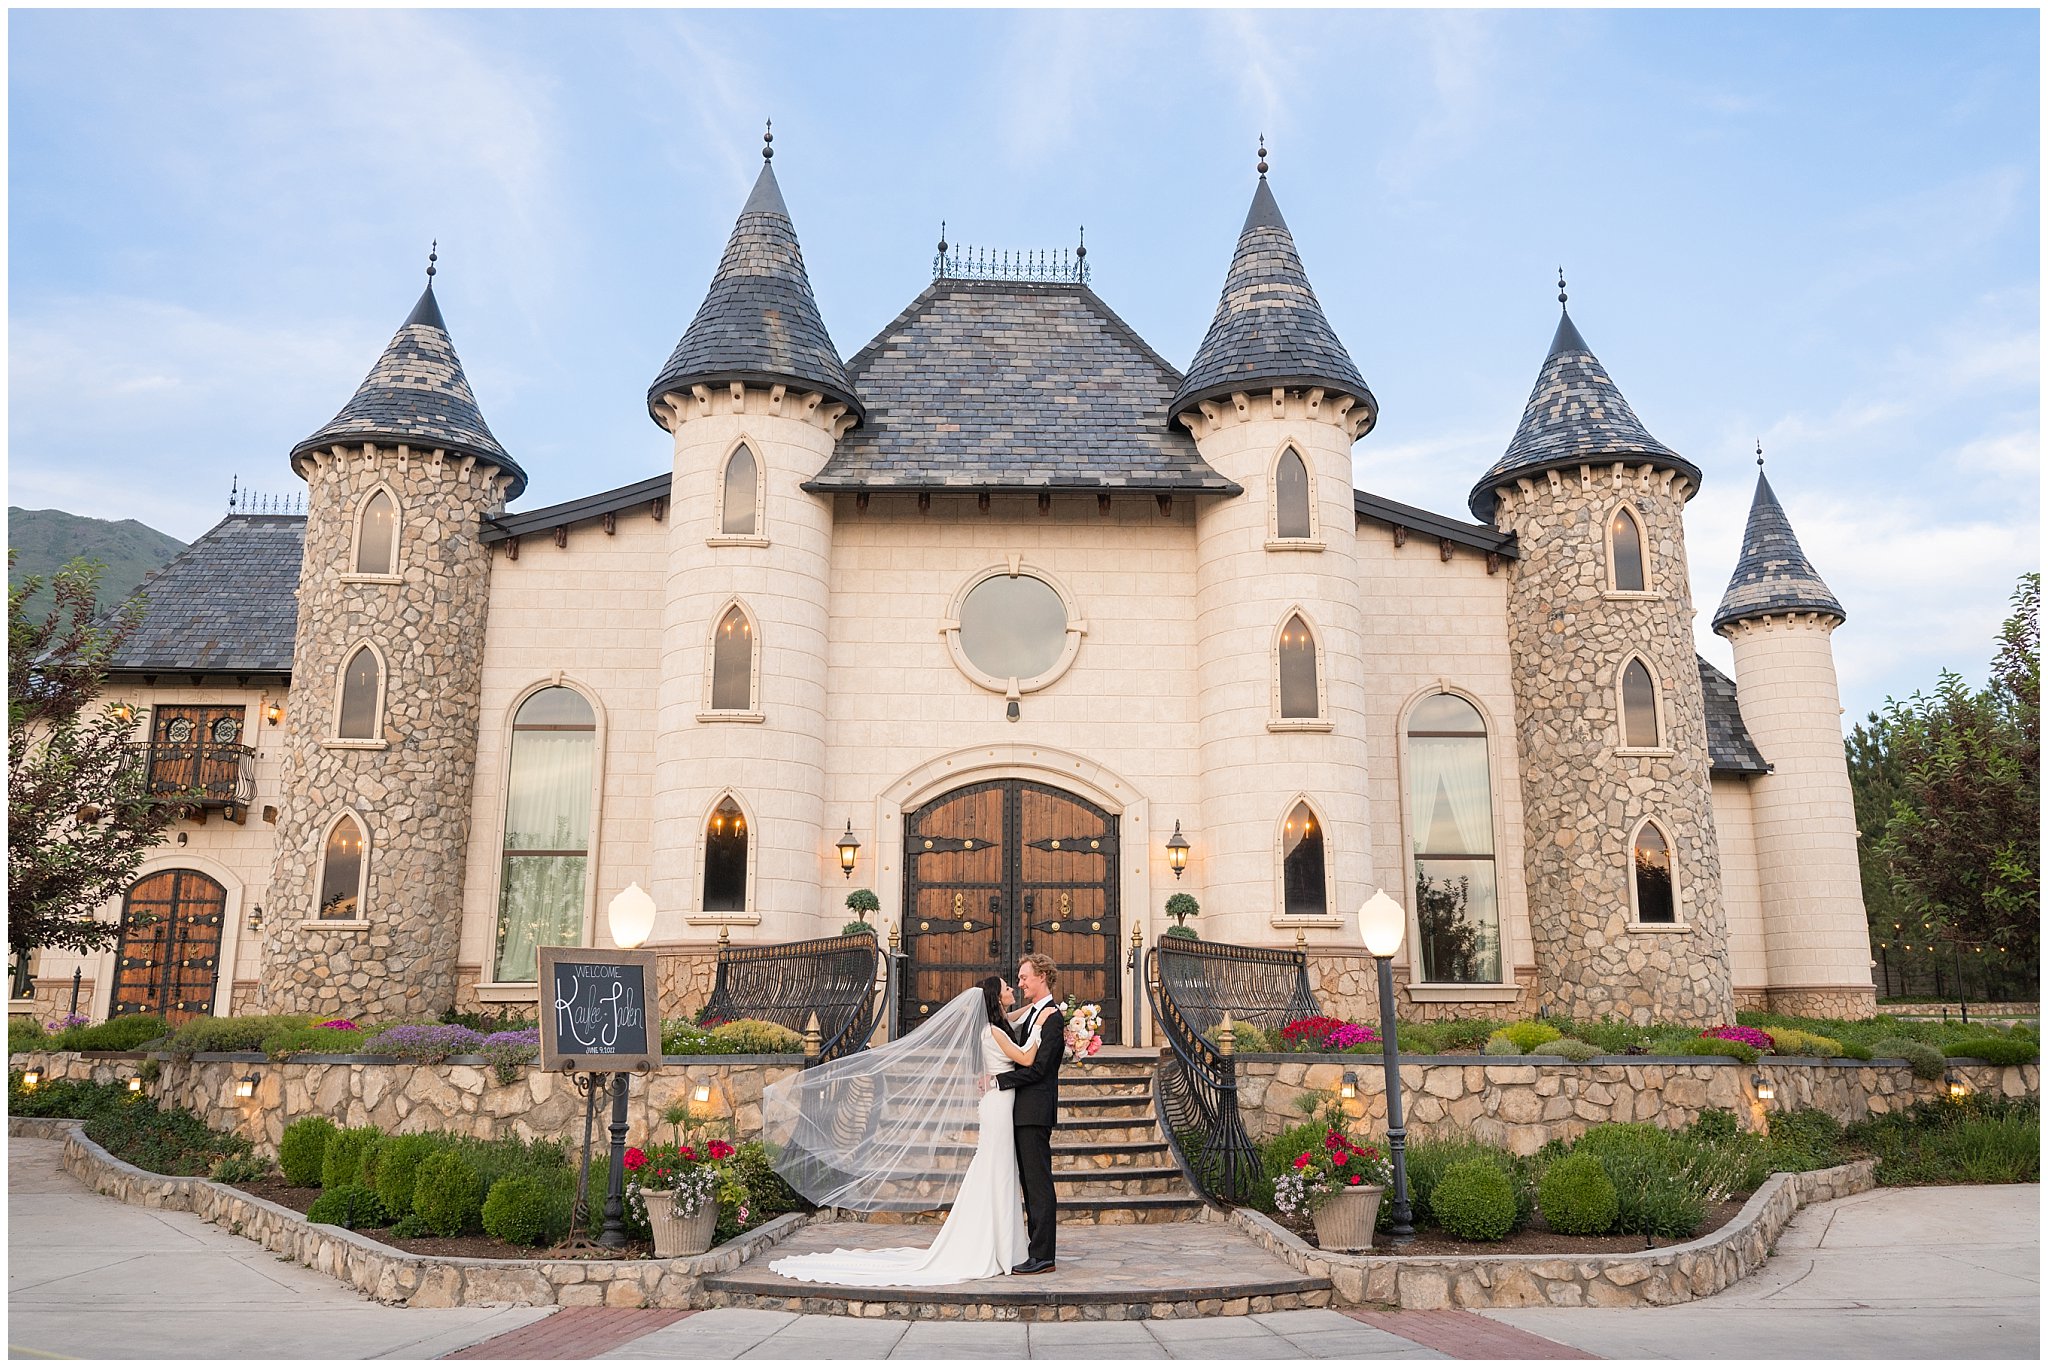 Bride and groom portraits outside of castle wedding venue with black and white and pink wedding colors | Draper Temple and Wadley Farms Summer Castle Wedding | Jessie and Dallin Photography